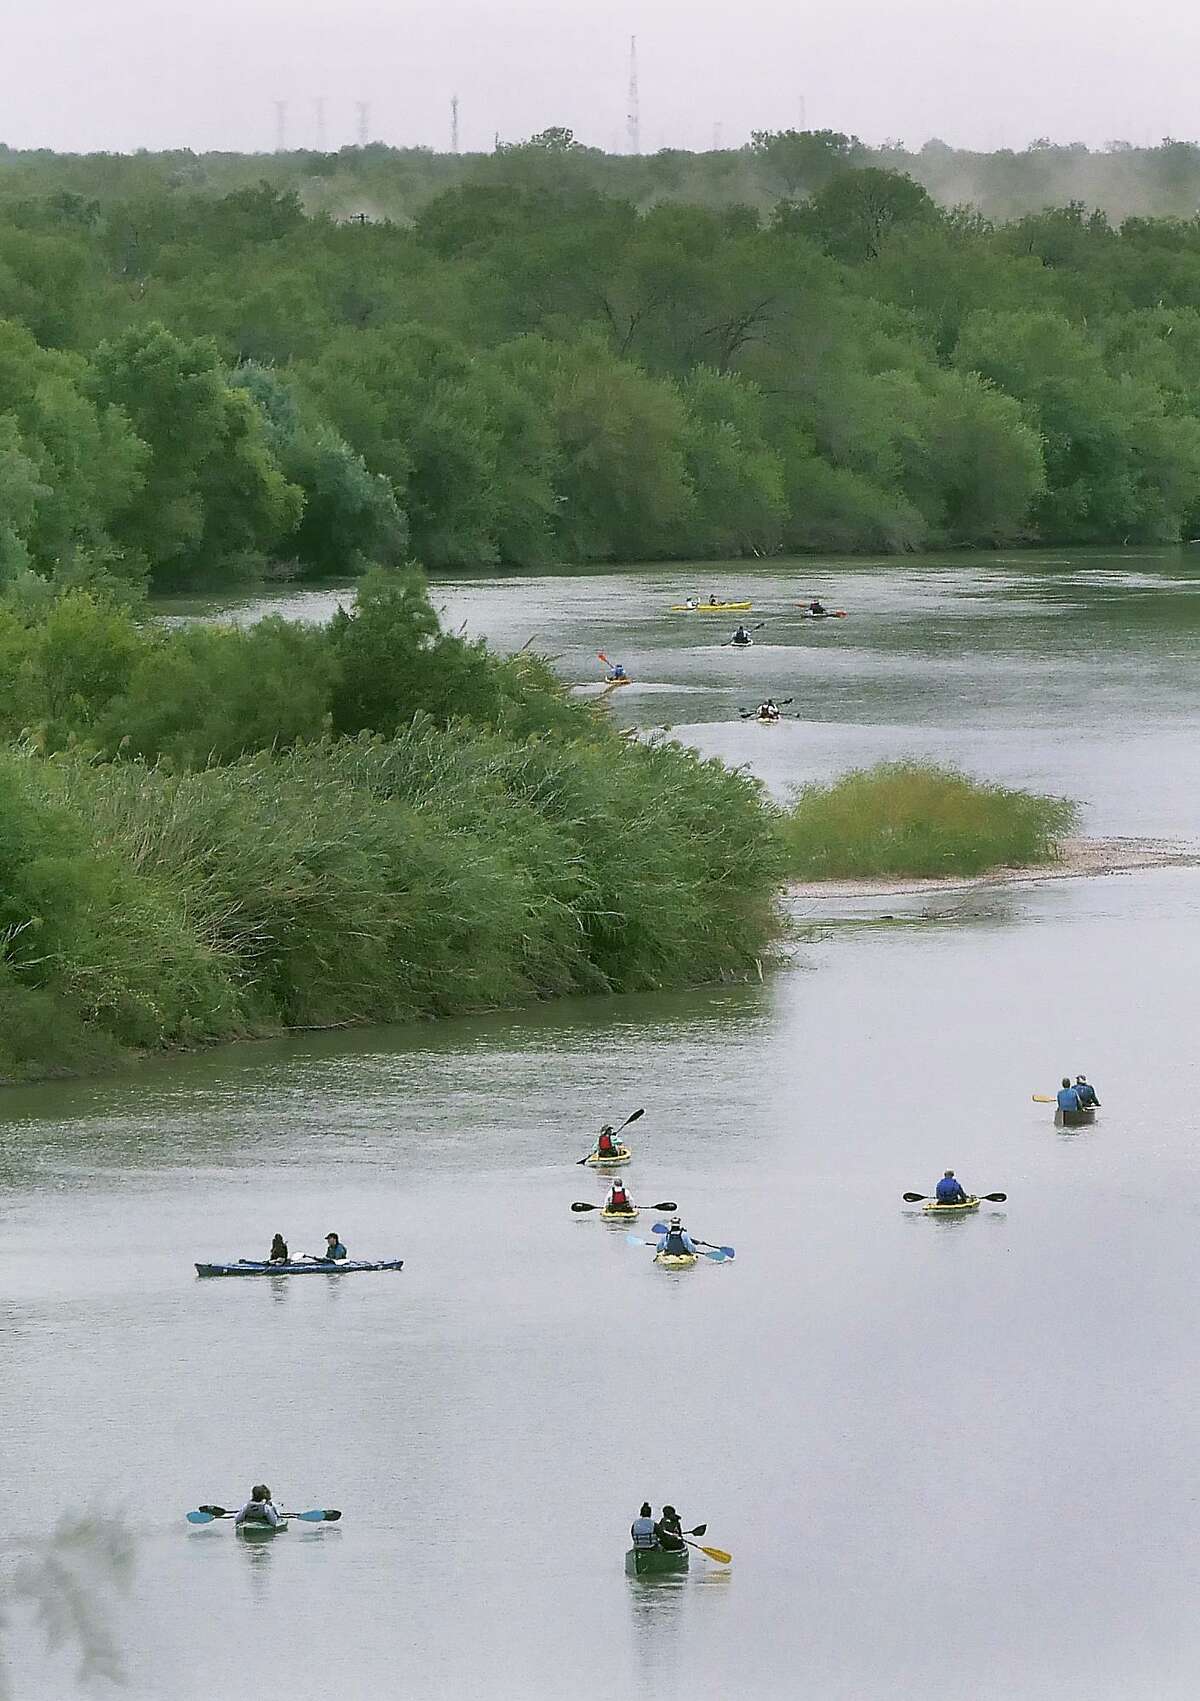 More than 70 people and one dog participated the 3rd Community Paddle on the River Saturday, October 12, 2019. Part of the 25th Annual Dia del Rio celebration, the event, hosted by the Rio Grande International Study Center with Councilman George Altgelt providing a light brunch at the Max Golf Course from which the group launched before finishing at the El Pico Water Treatment Plant.